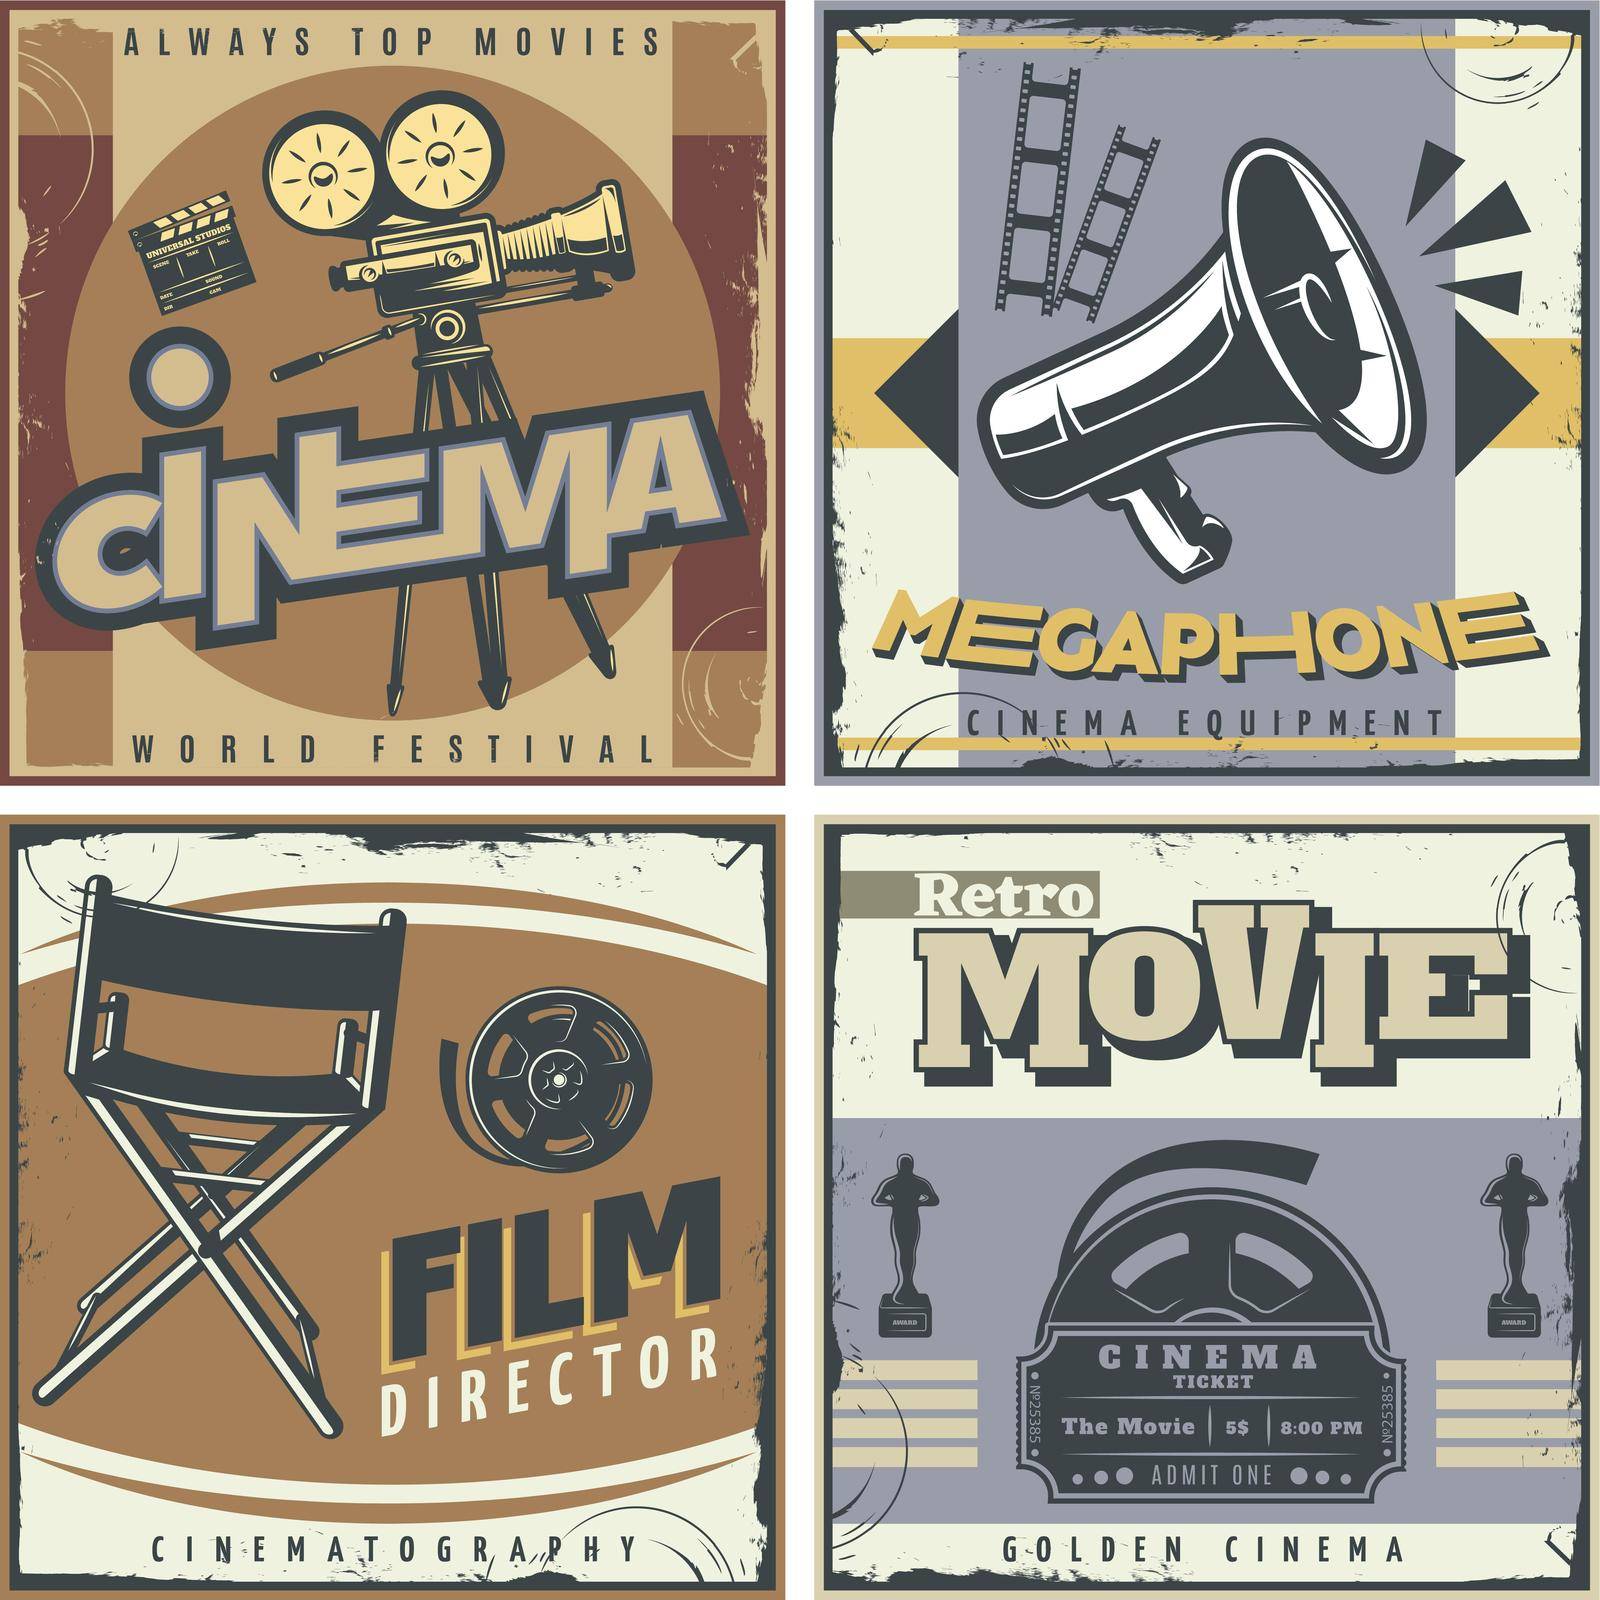 Four squares composition in retro style with cinema movie making symbols film directors chair megaphone vector illustration